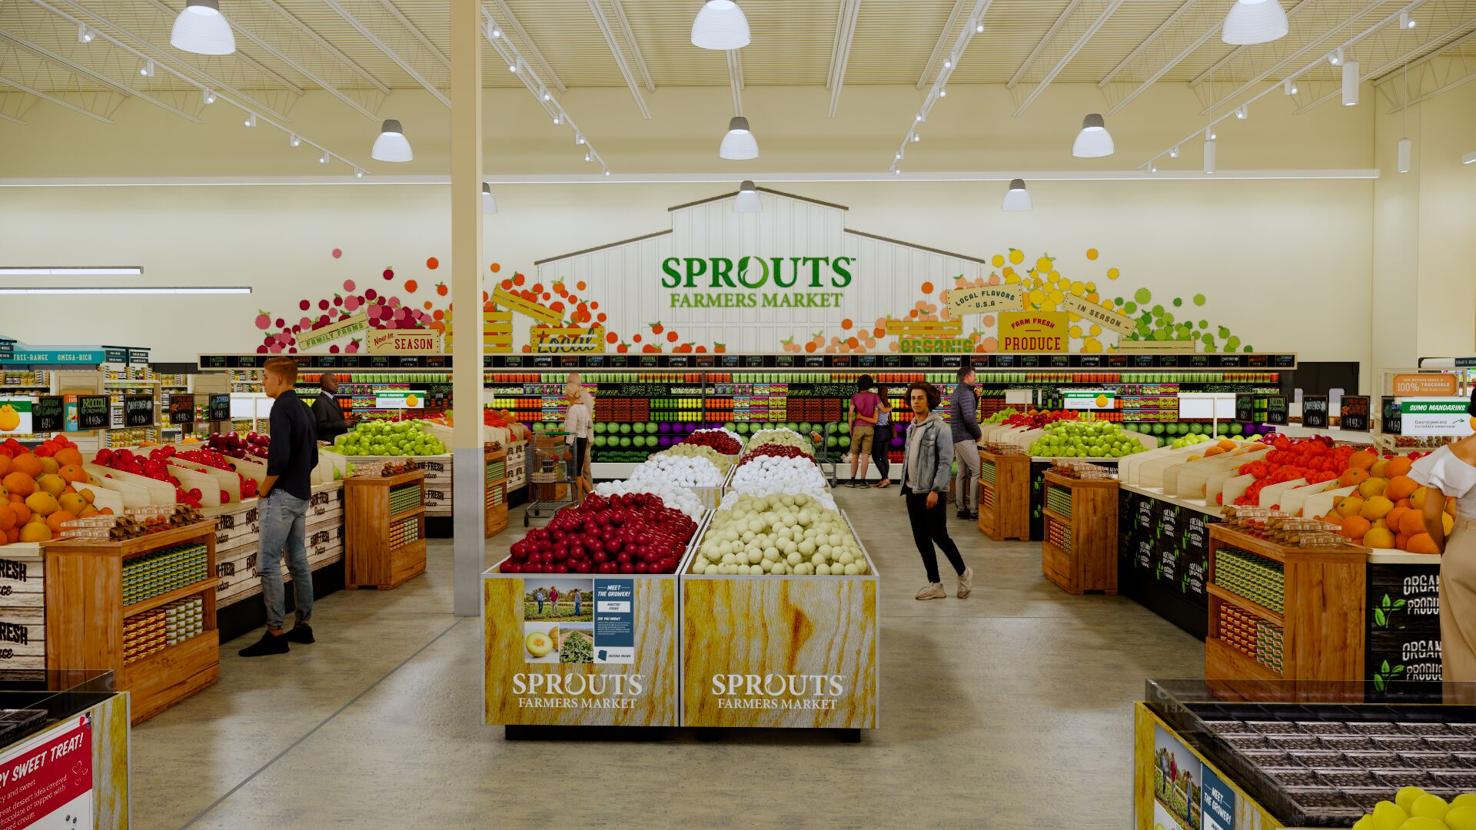 Sprouts hiring 100 employees for new store opening near Mall of Georgia in August